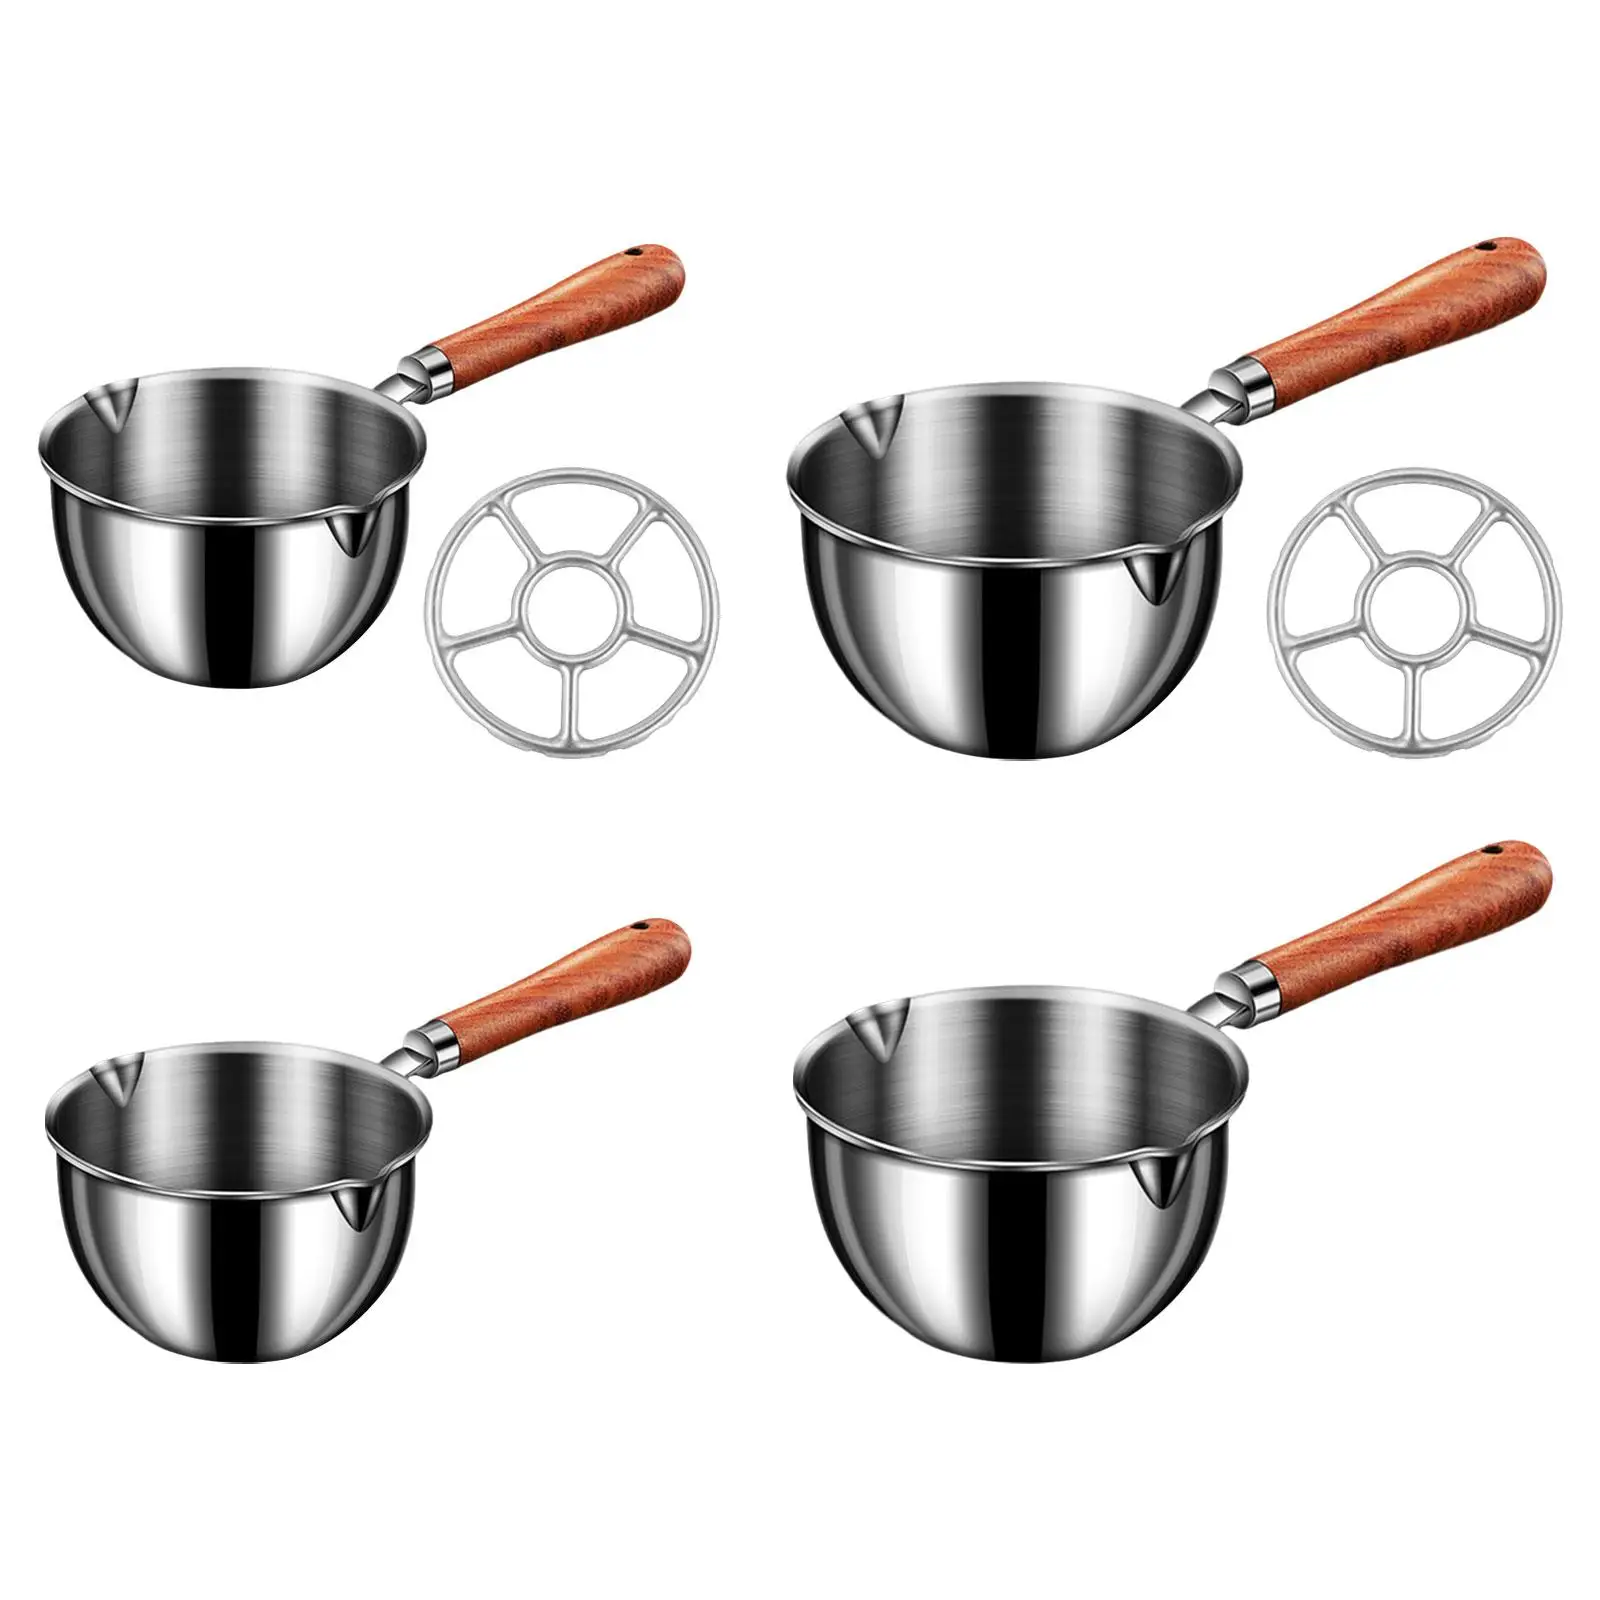 Universal Saucepan Pot with Scale with Pour Spouts Multifunctional Condiment Sauce Pan Small Soup Pot for Chocolate Melting